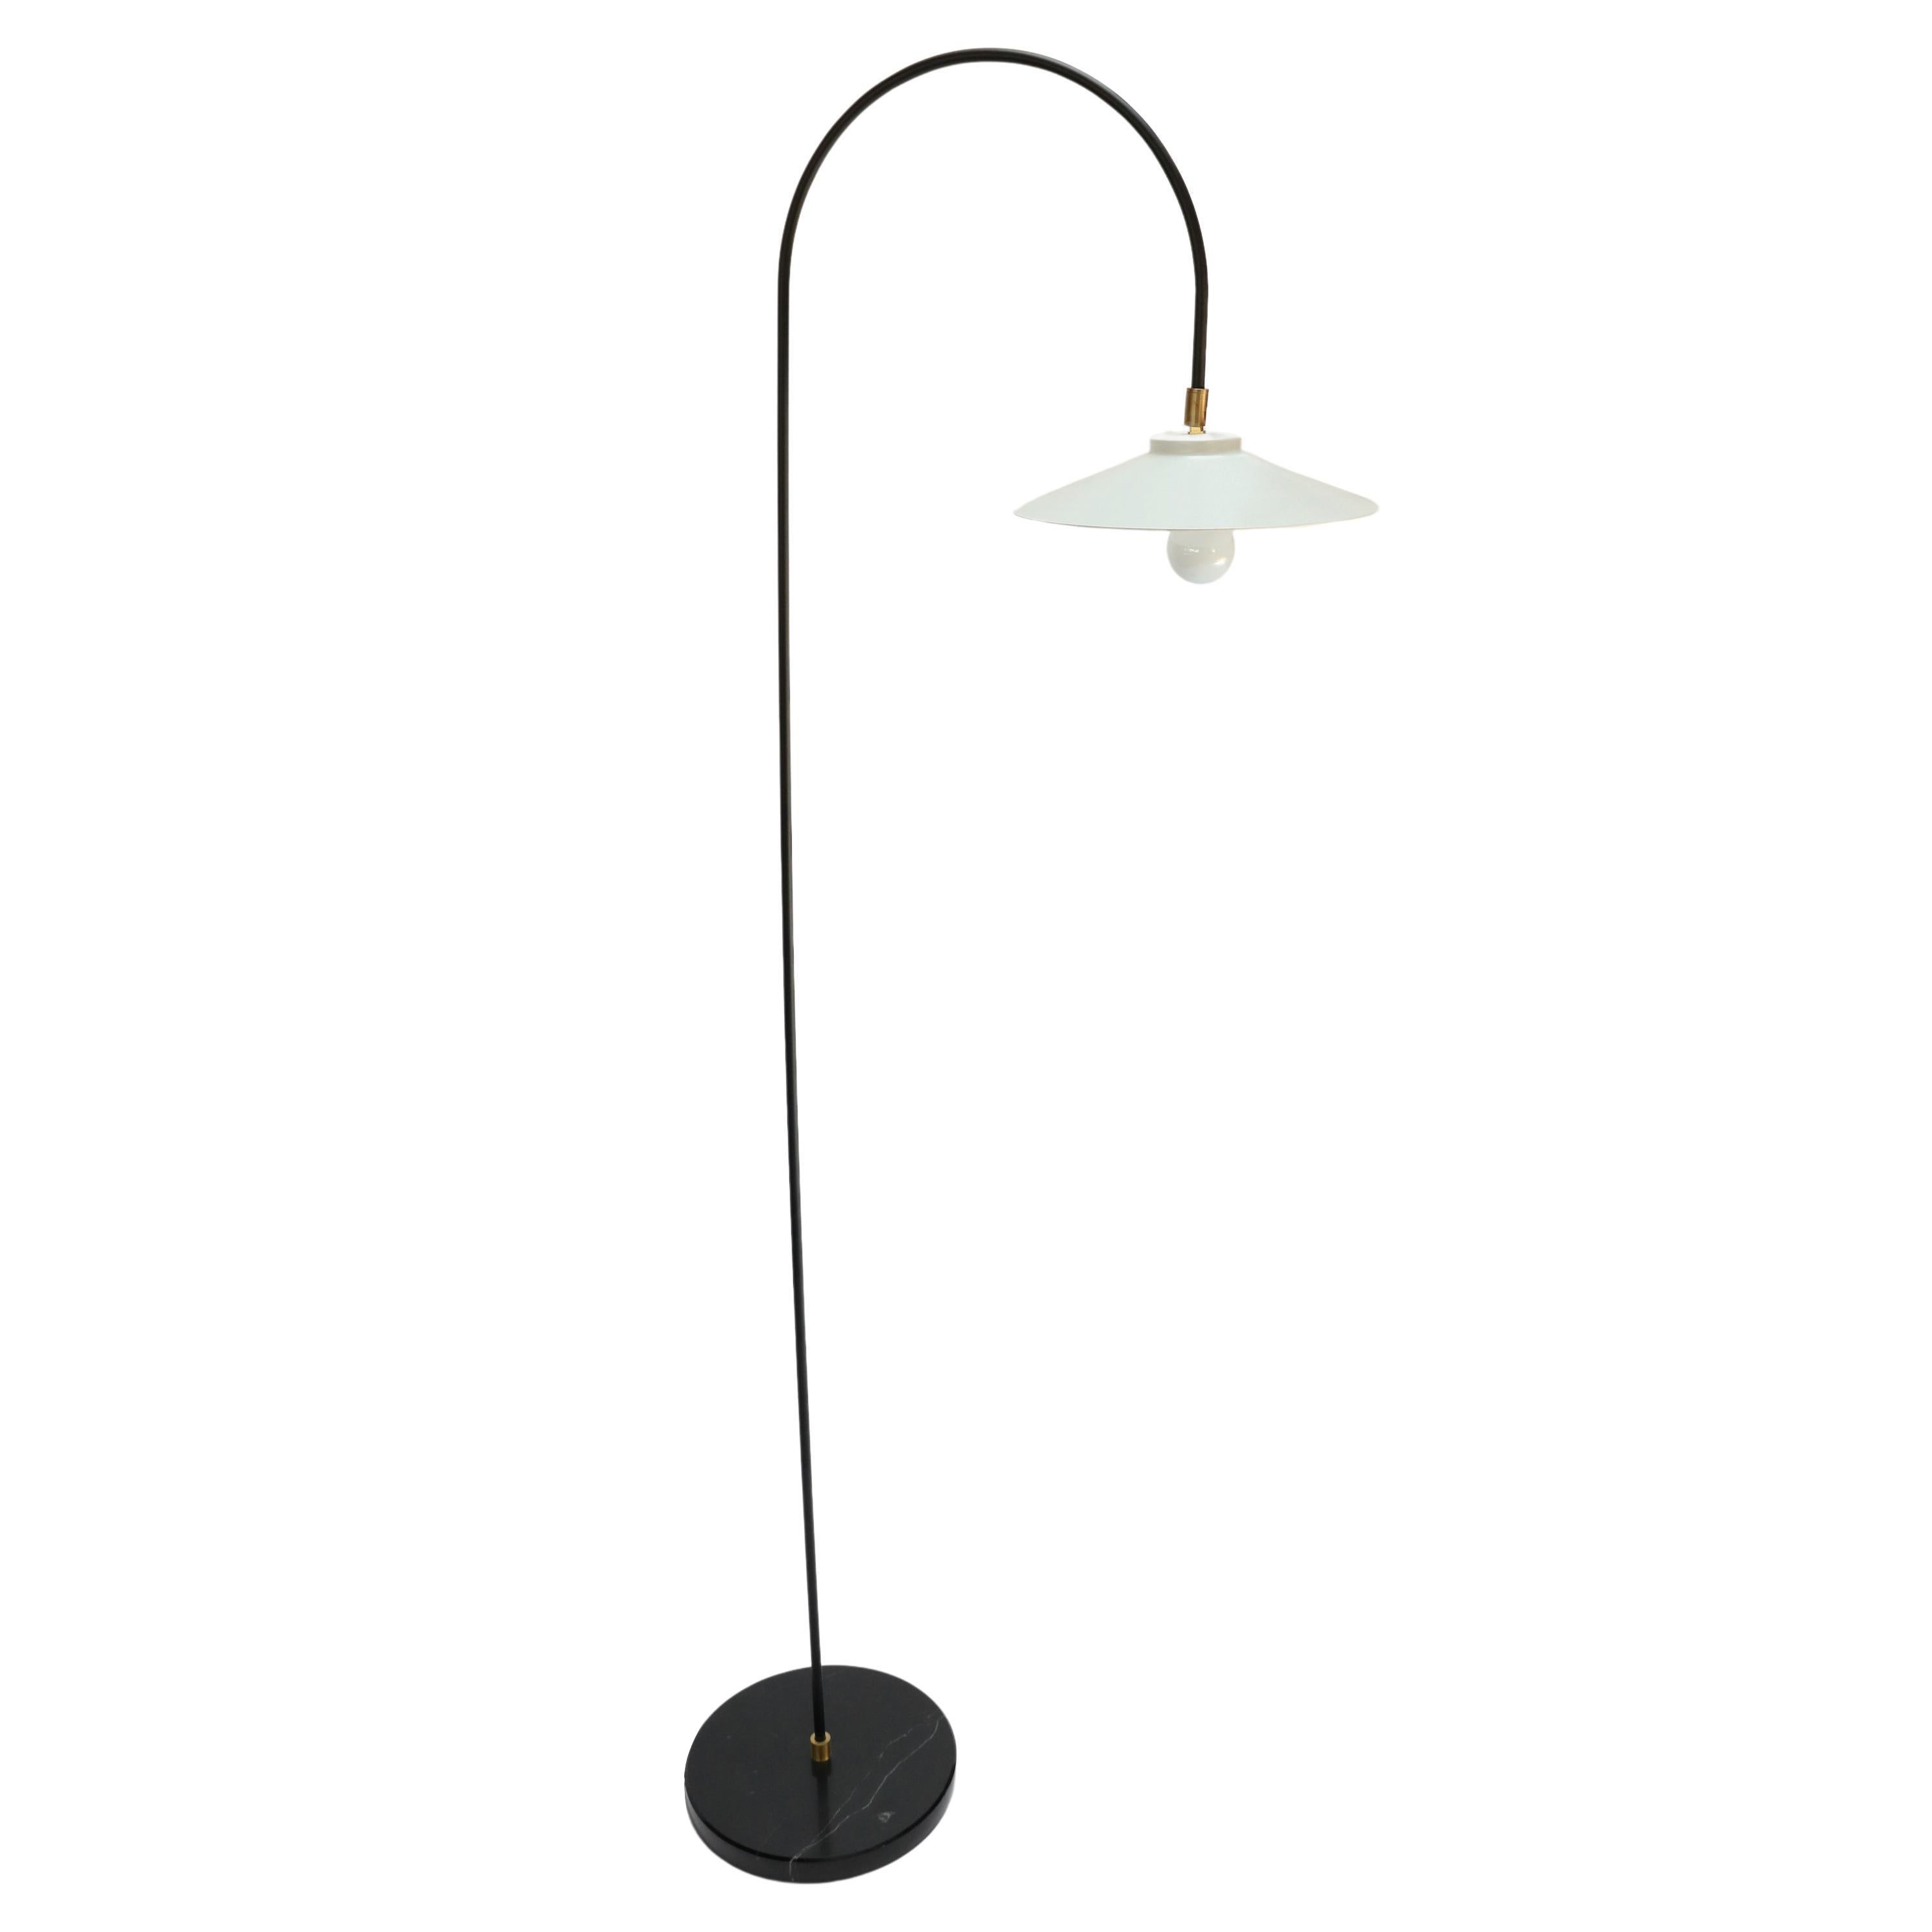 Custom Black & White Metal Mid Century Style Arch Floor Lamp By Adesso Imports